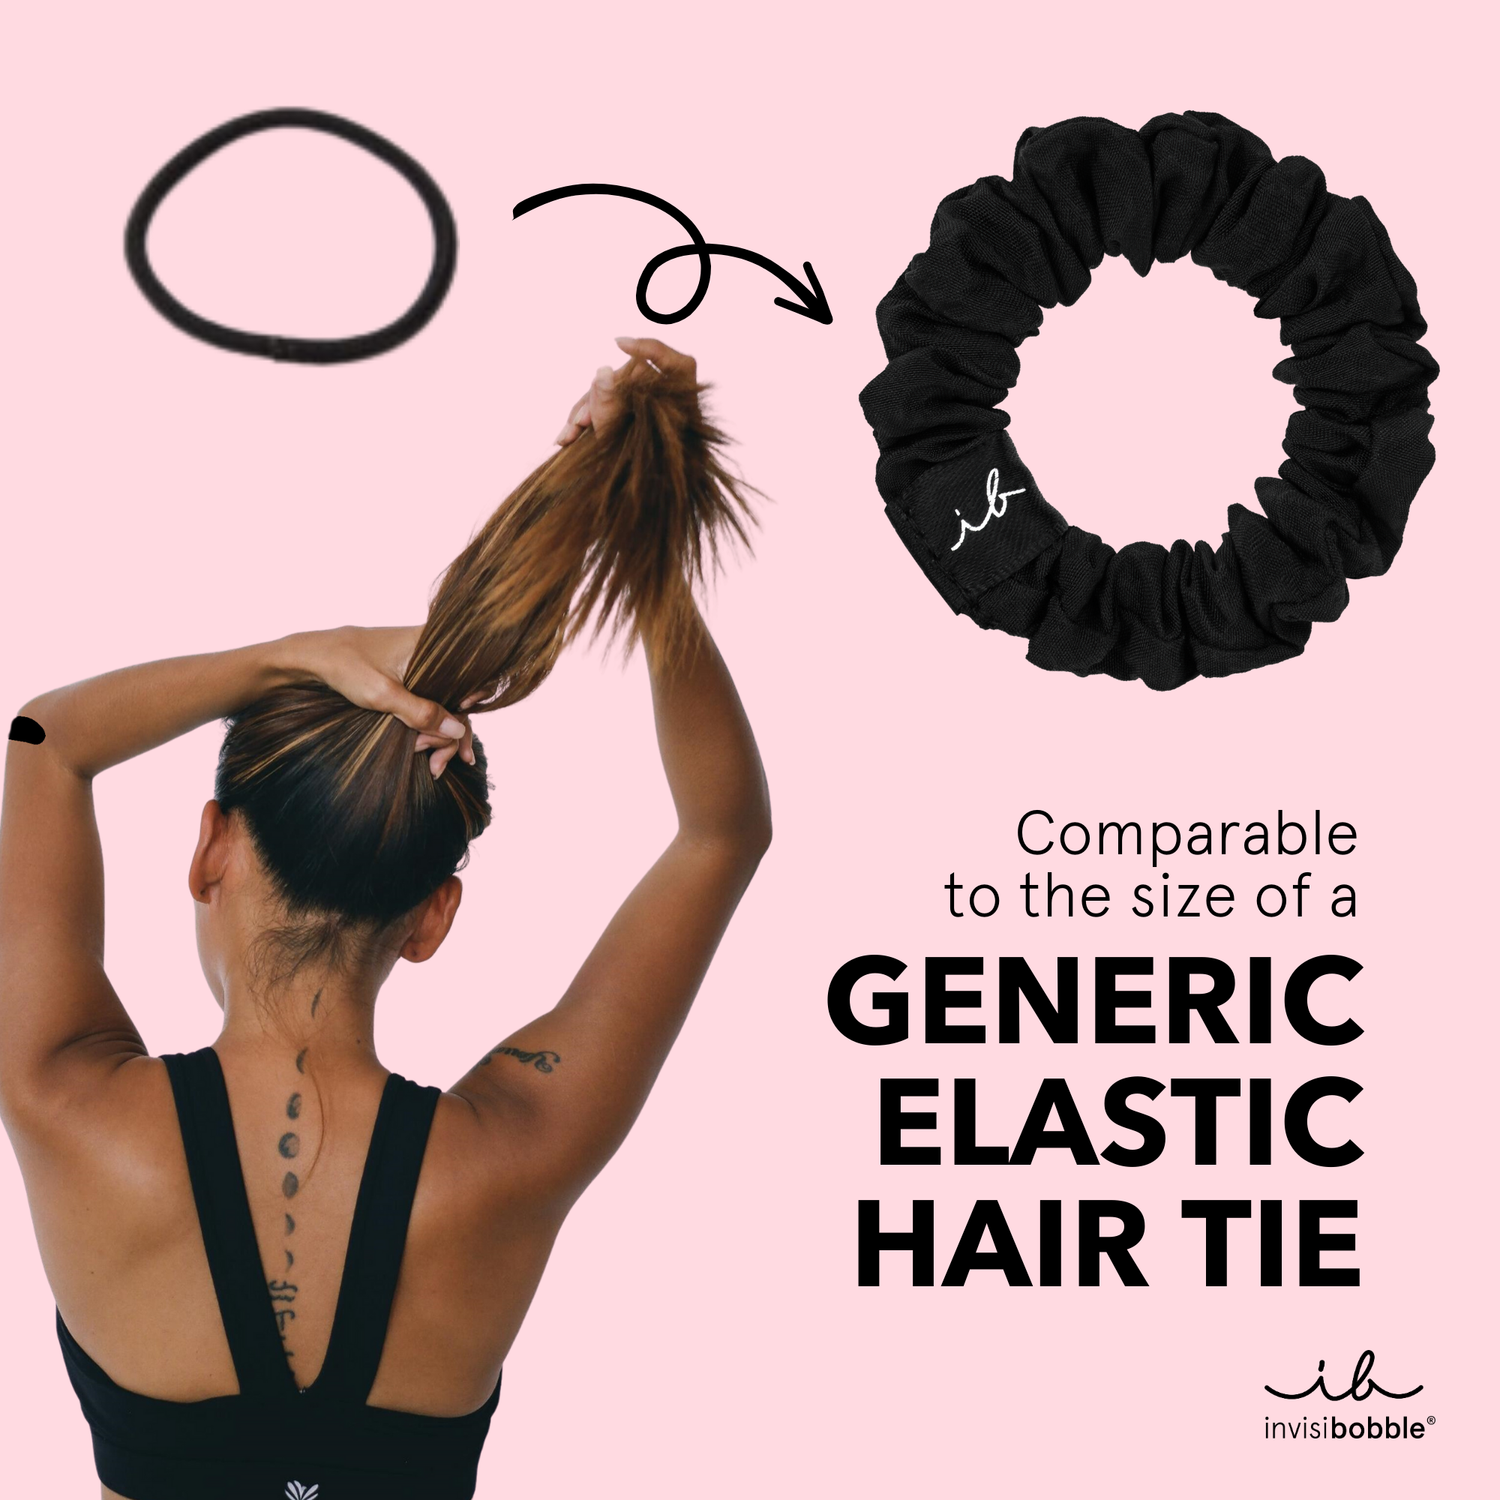 Invisibobble Loop Be Gentle: Super slim, damage-free hair ties with scientifically proven HAIRLOVETECH.